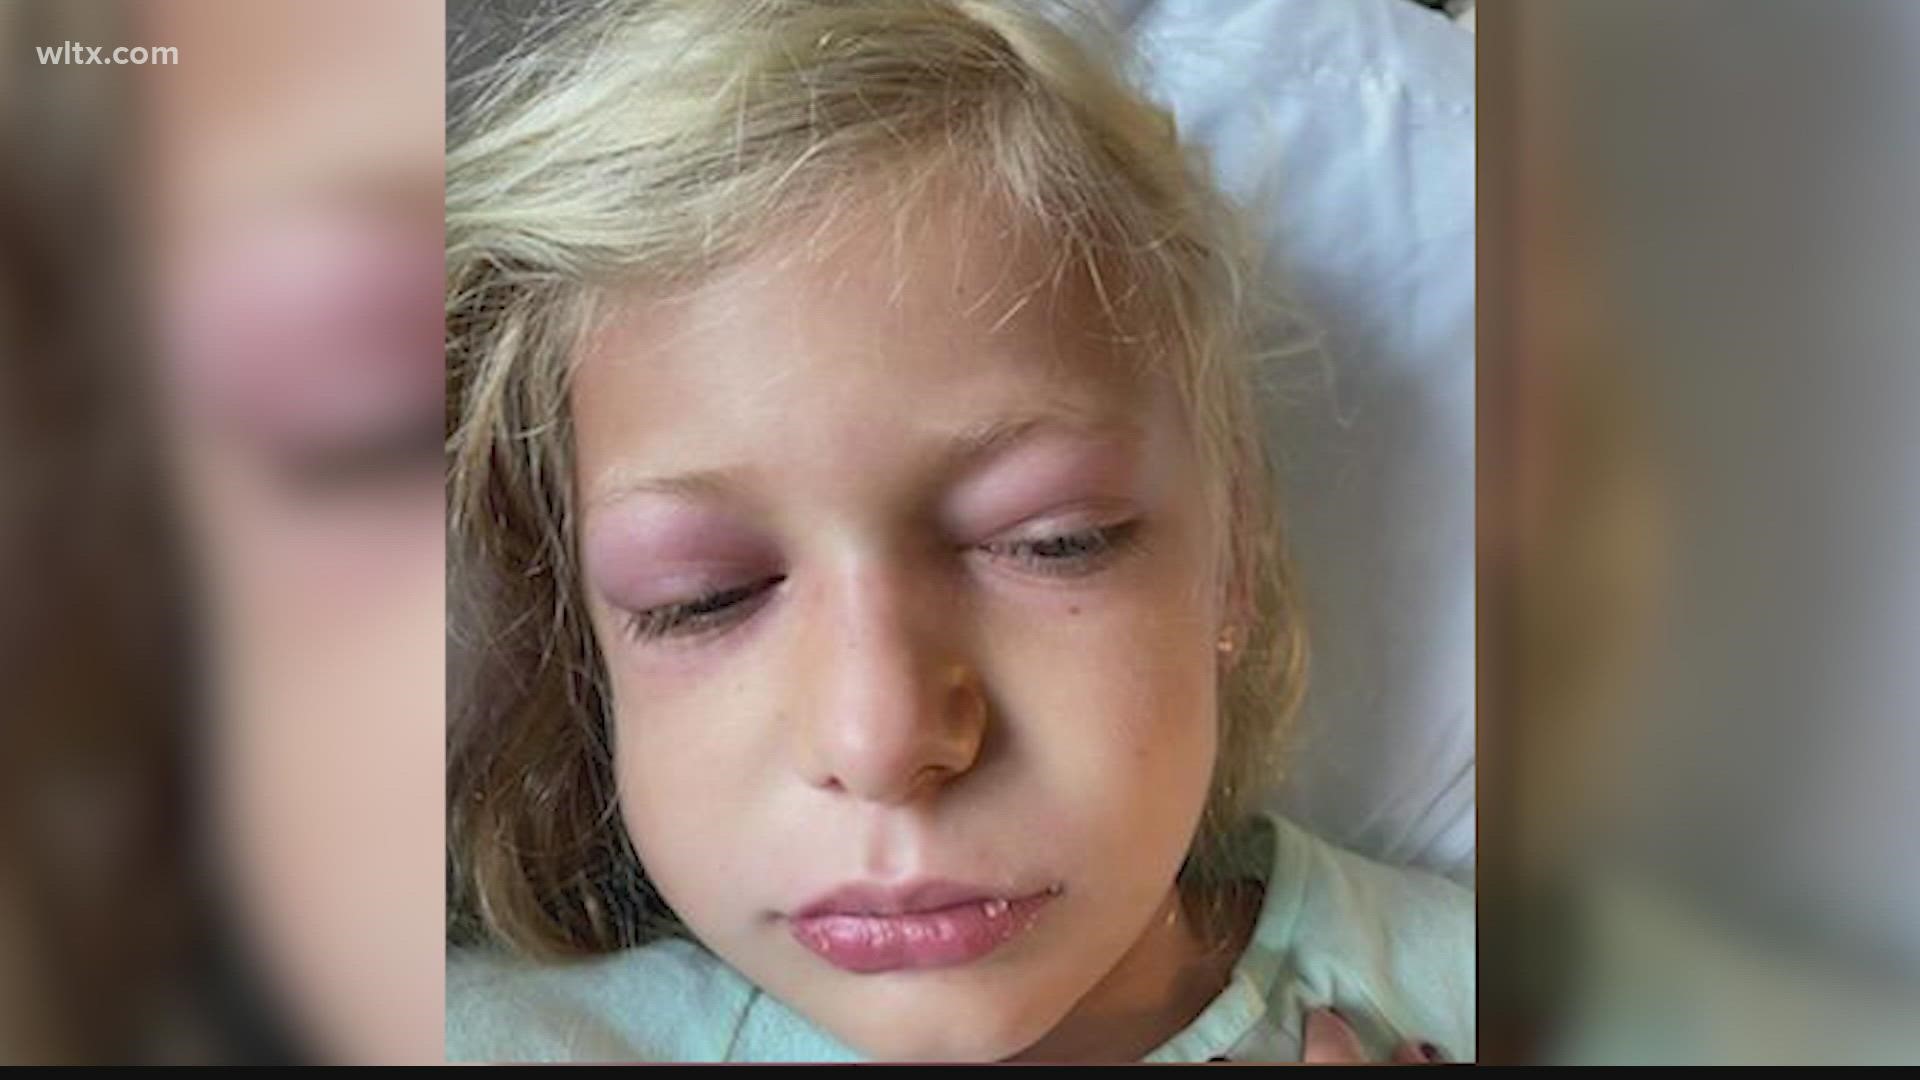 A ten-year-old South Carolina girl has recovered after her parents say she had MIS-C, which doctors say children can get after having COVID-19.